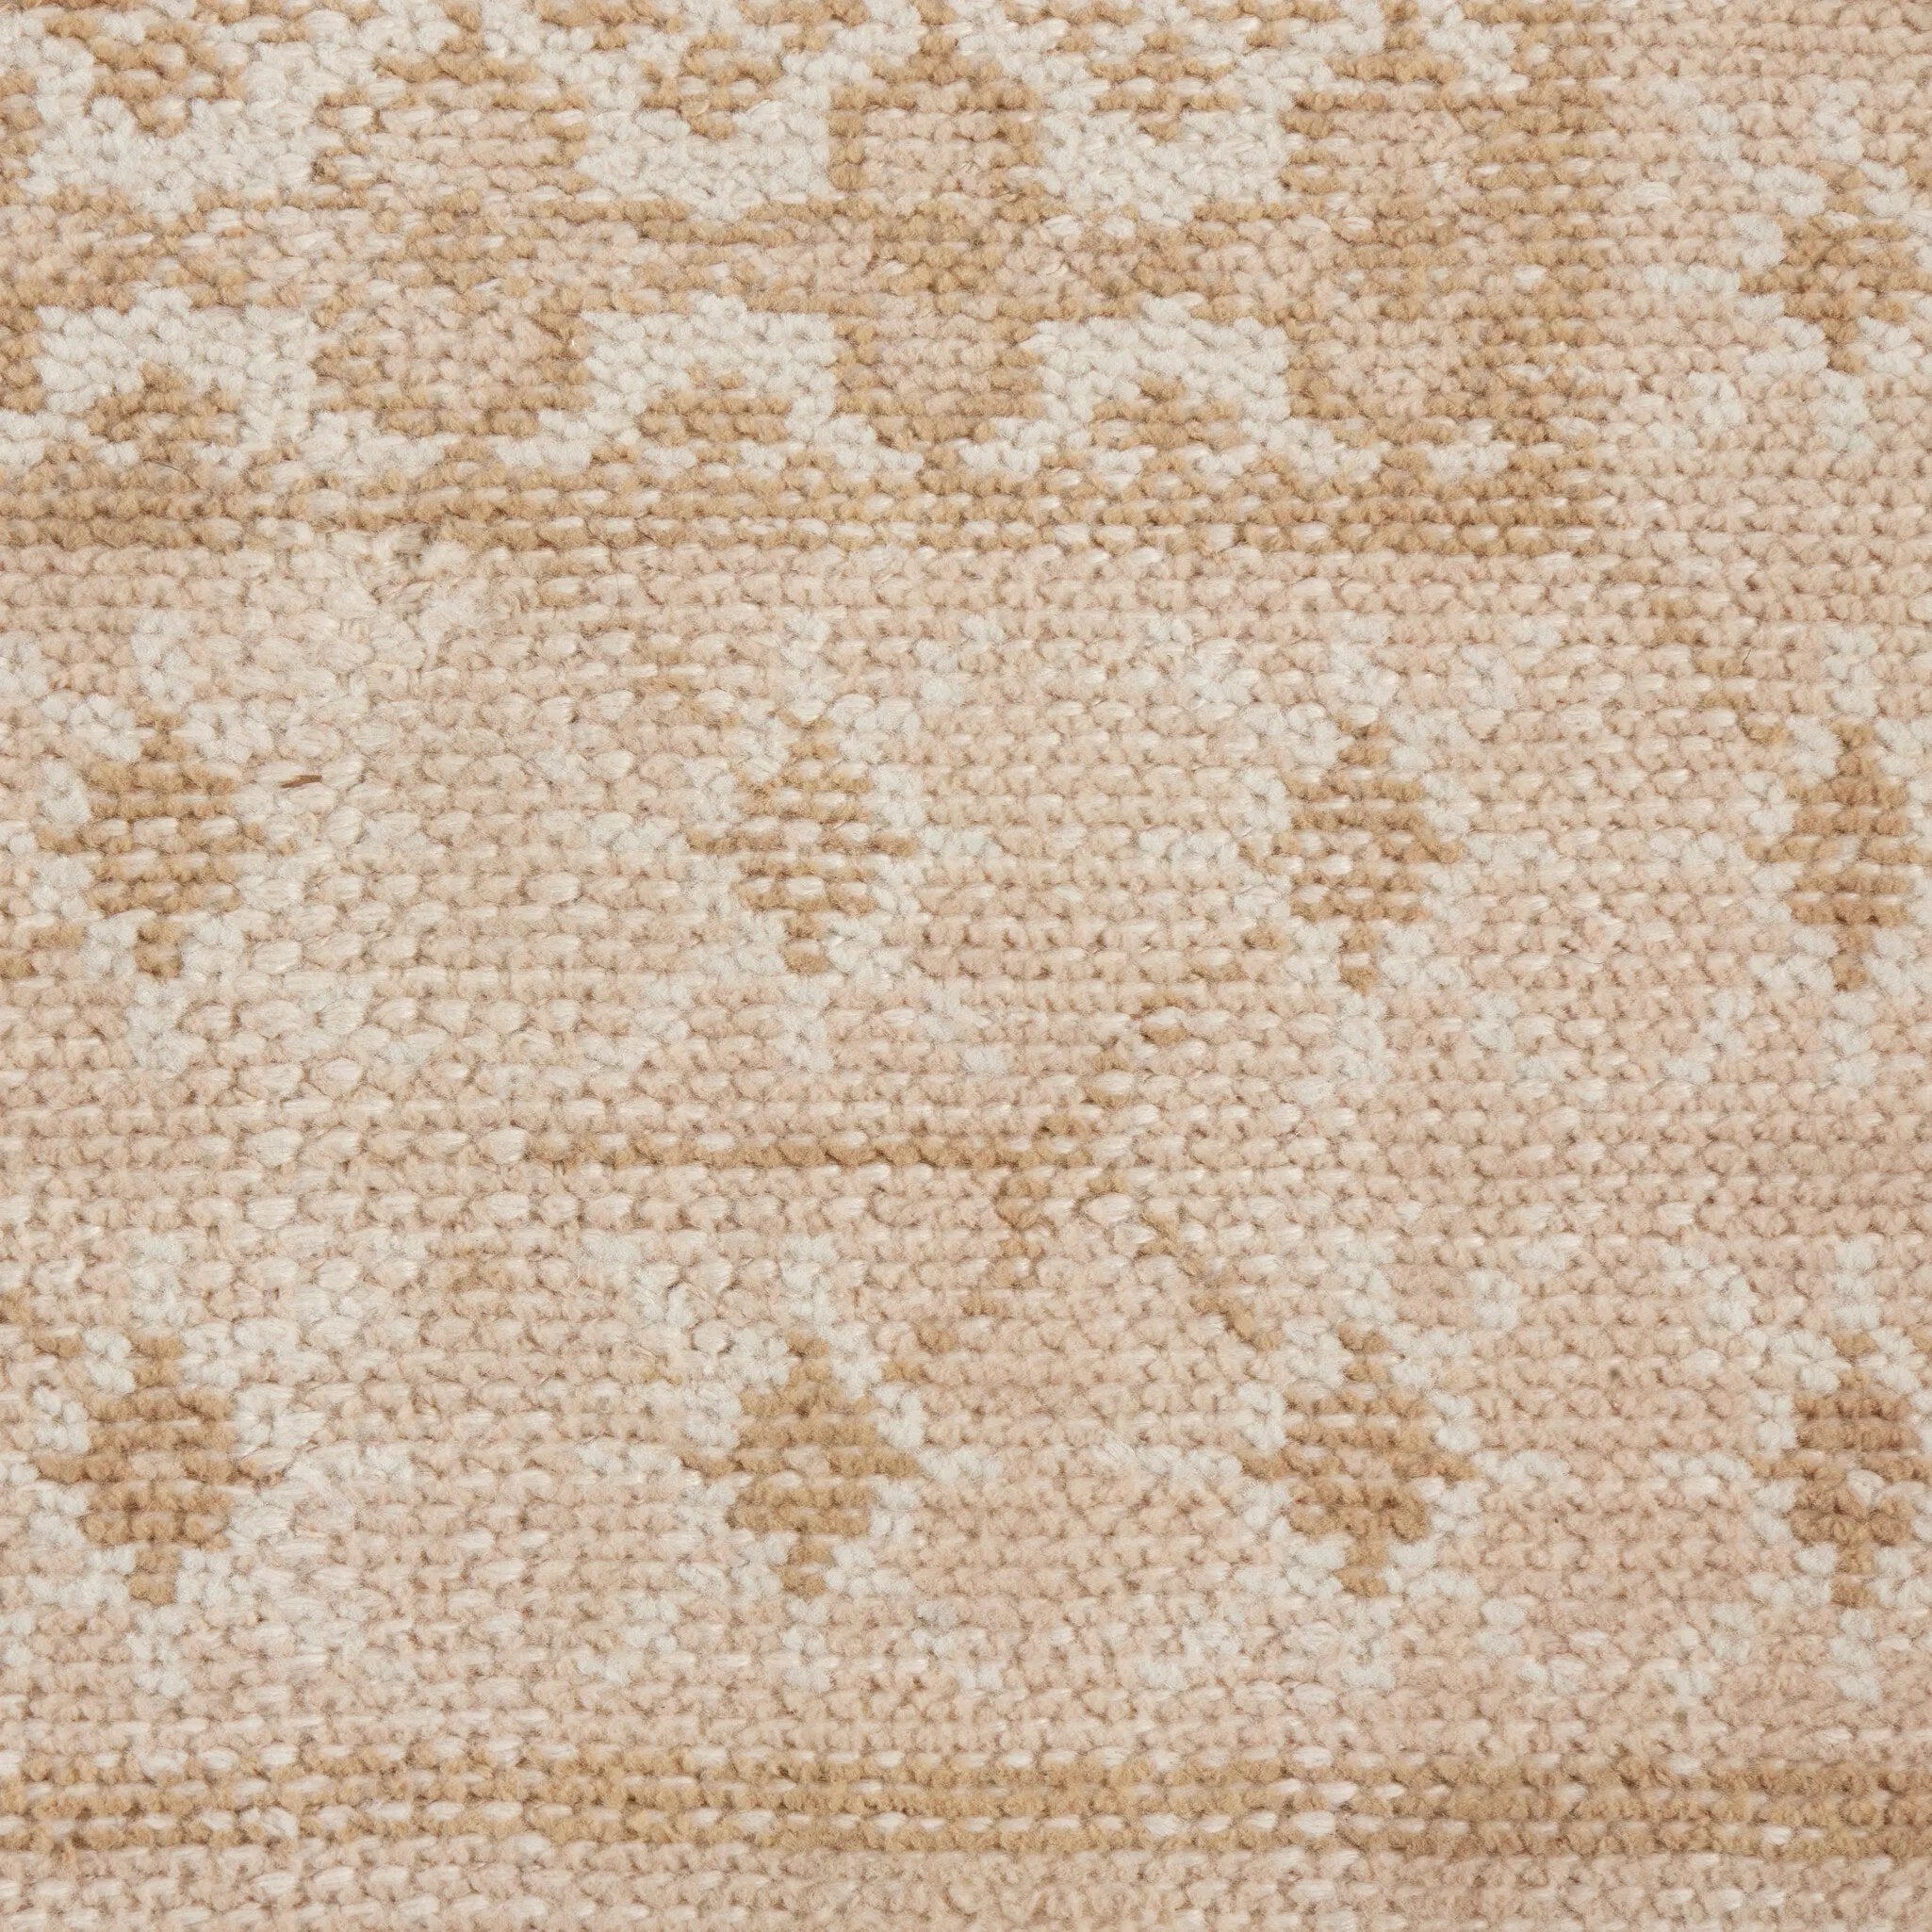 Warm neutrals and intricate patterns. Following a technique and tradition dating back thousands of years, each hand-knotted rug can take two to three master weavers five to six weeks to complete, depending on the size and intricacy of each rug. Amethyst Home provides interior design, new home construction design consulting, vintage area rugs, and lighting in the Miami metro area.